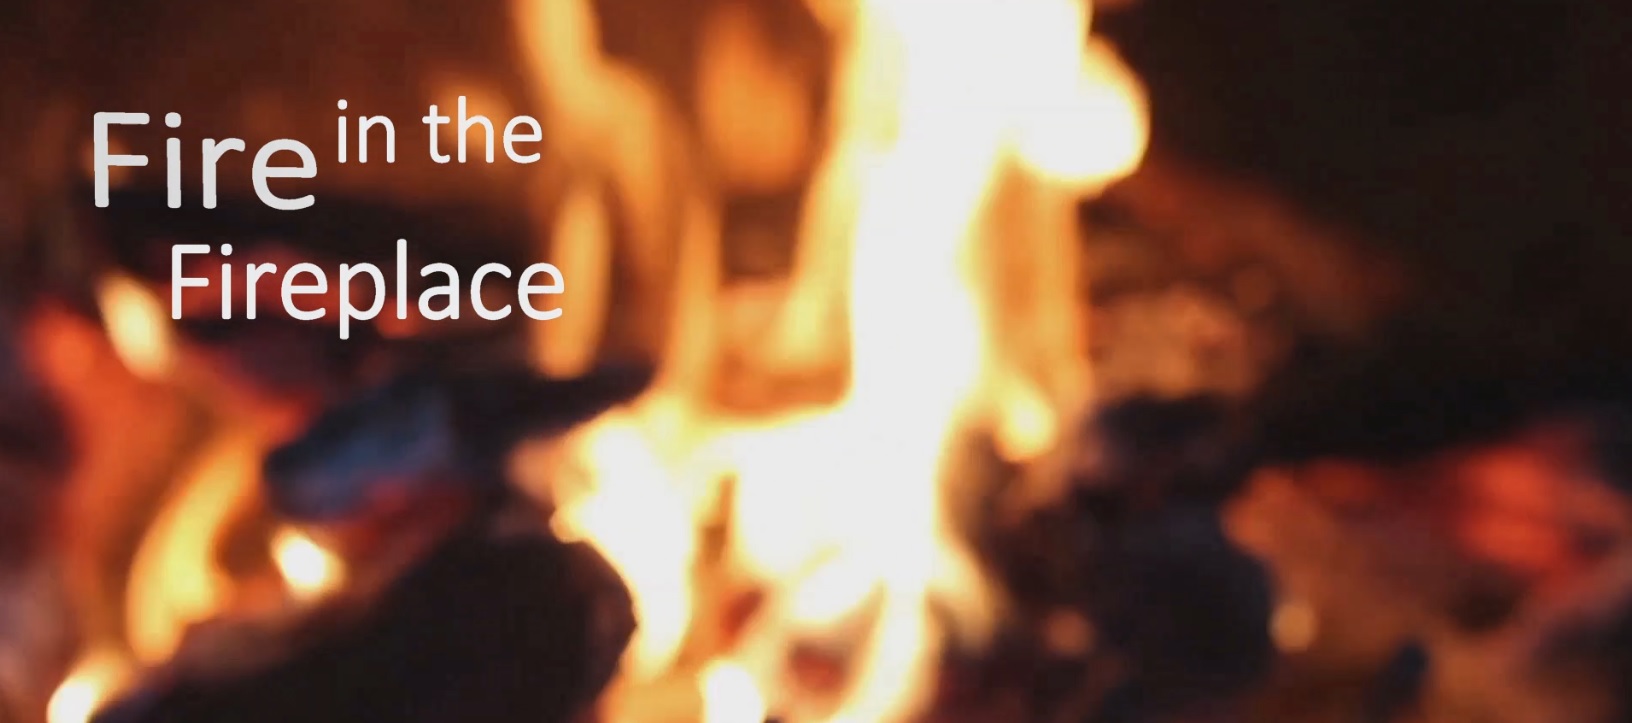 Fire in the Fireplace: Anglican Perspective